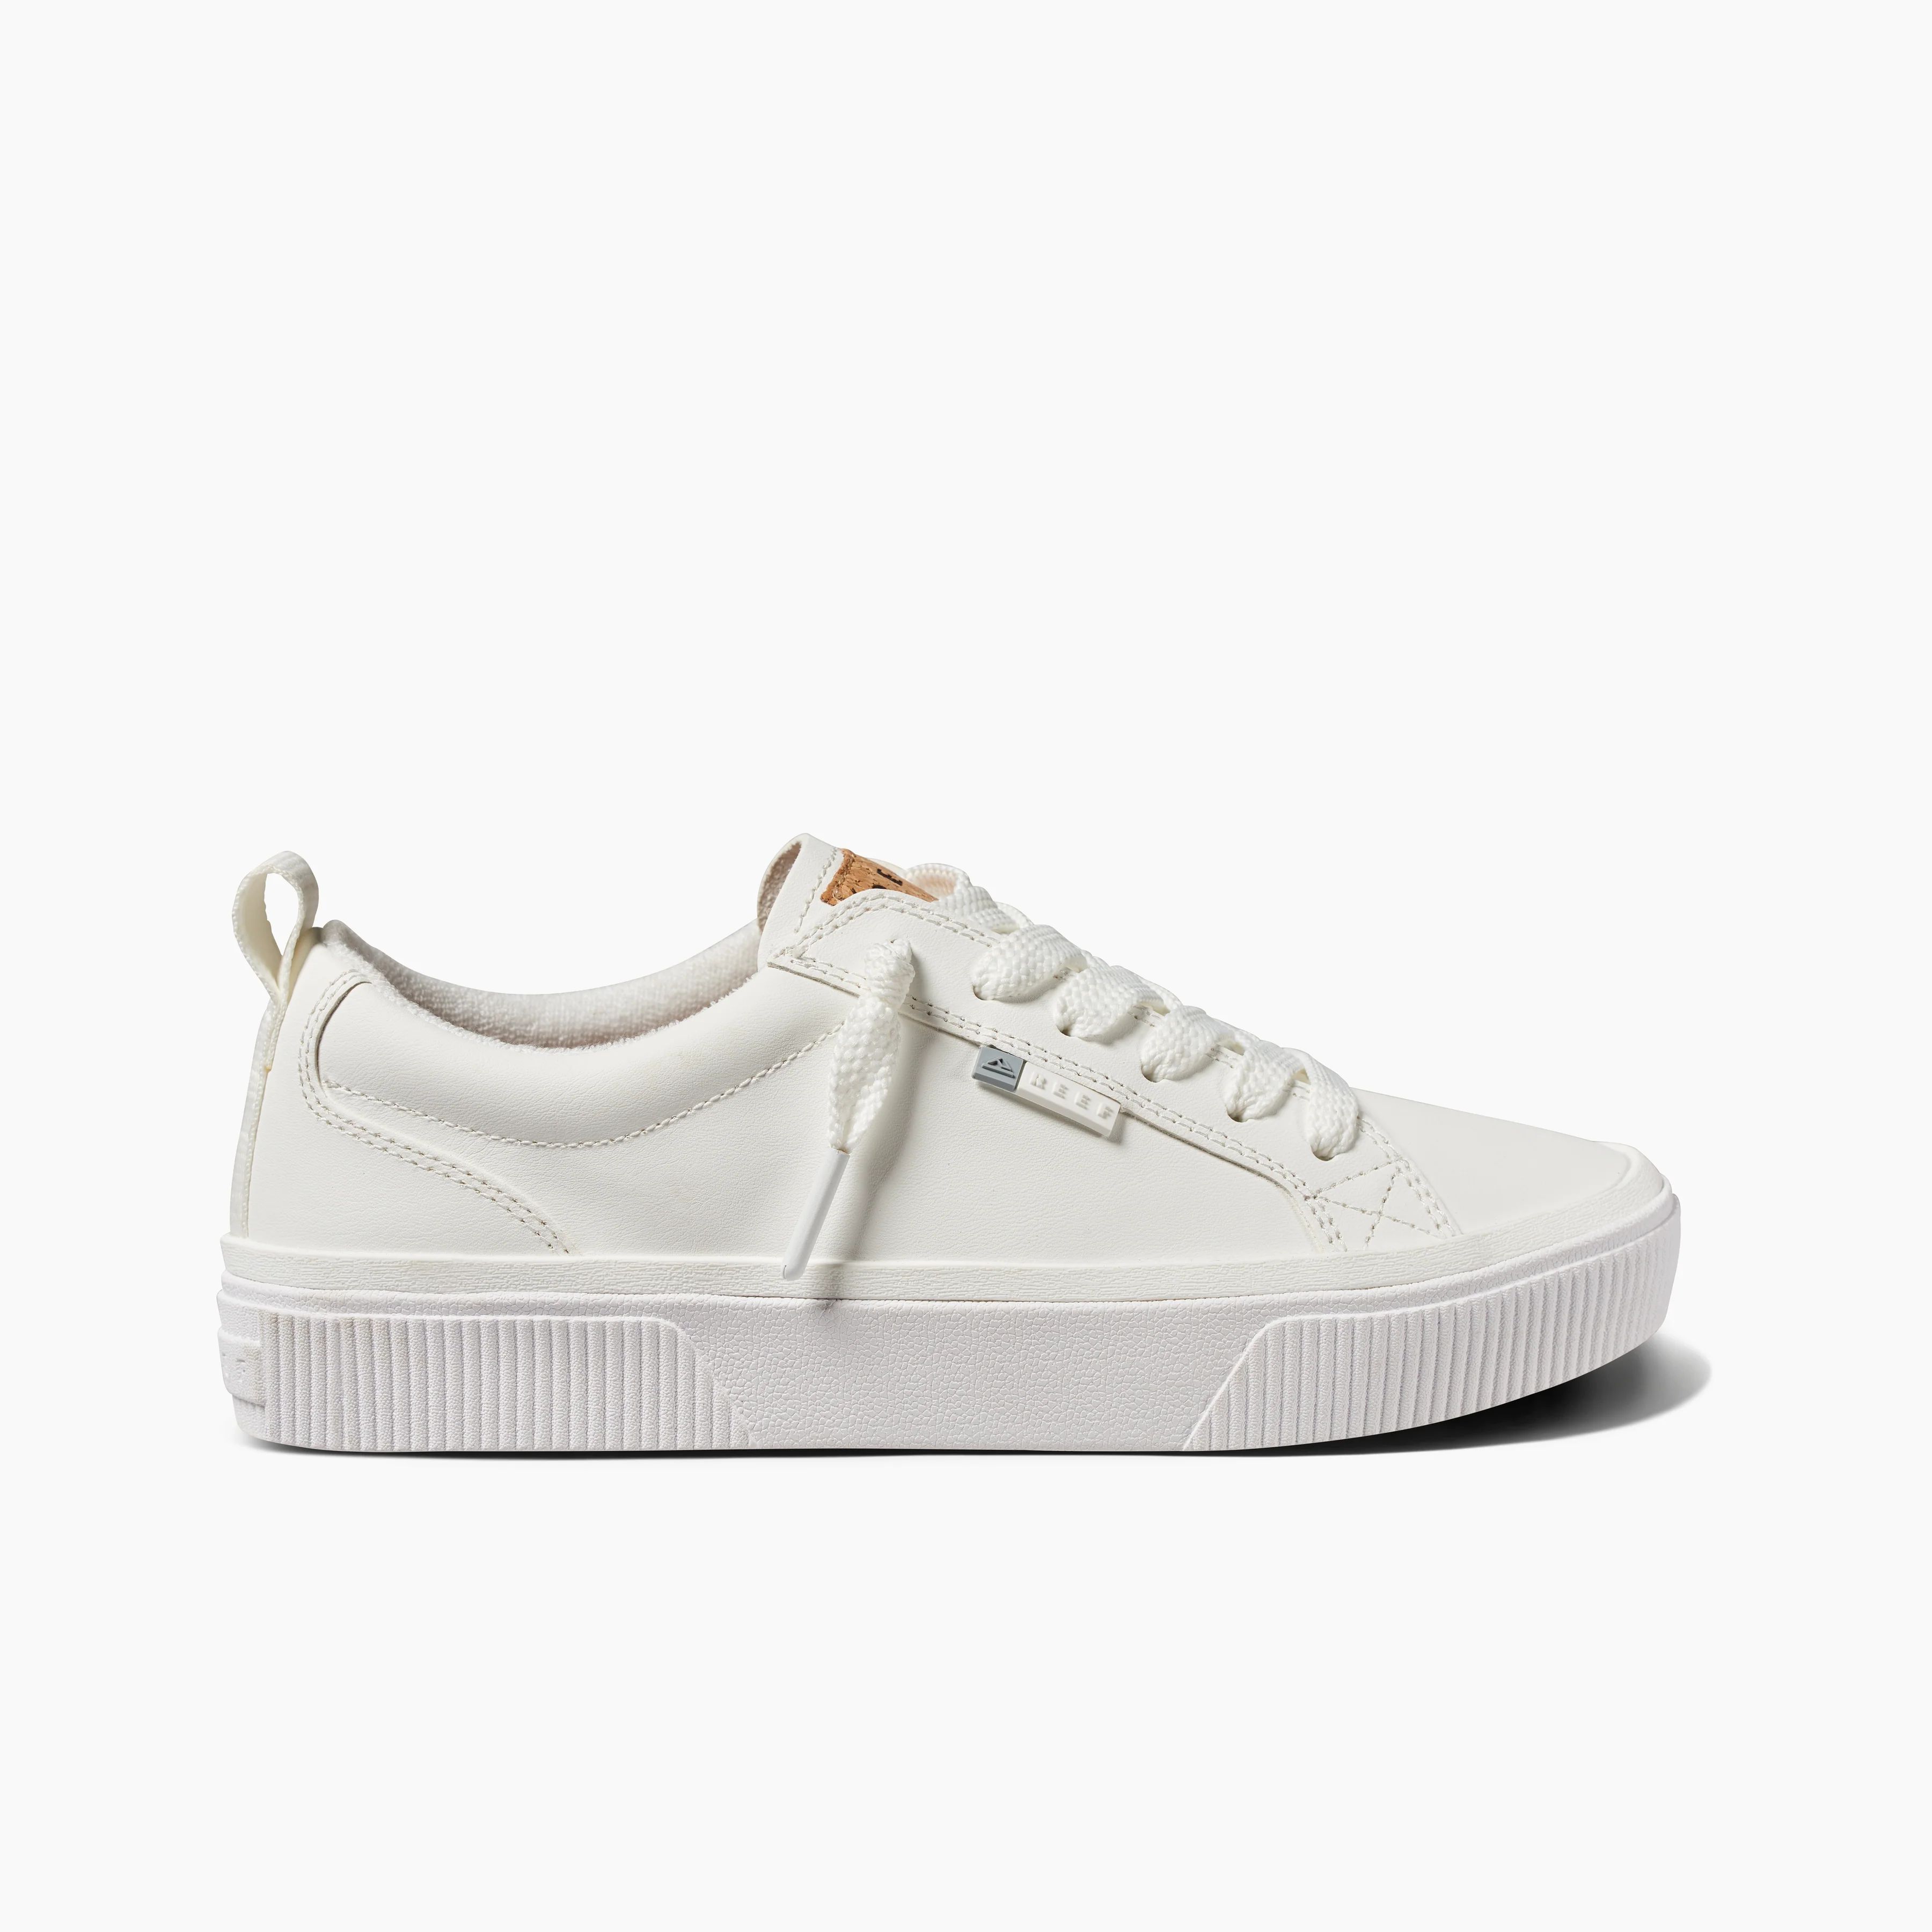 Lay Day Dawn: Women's White Leather Sneakers | REEF® | Reef